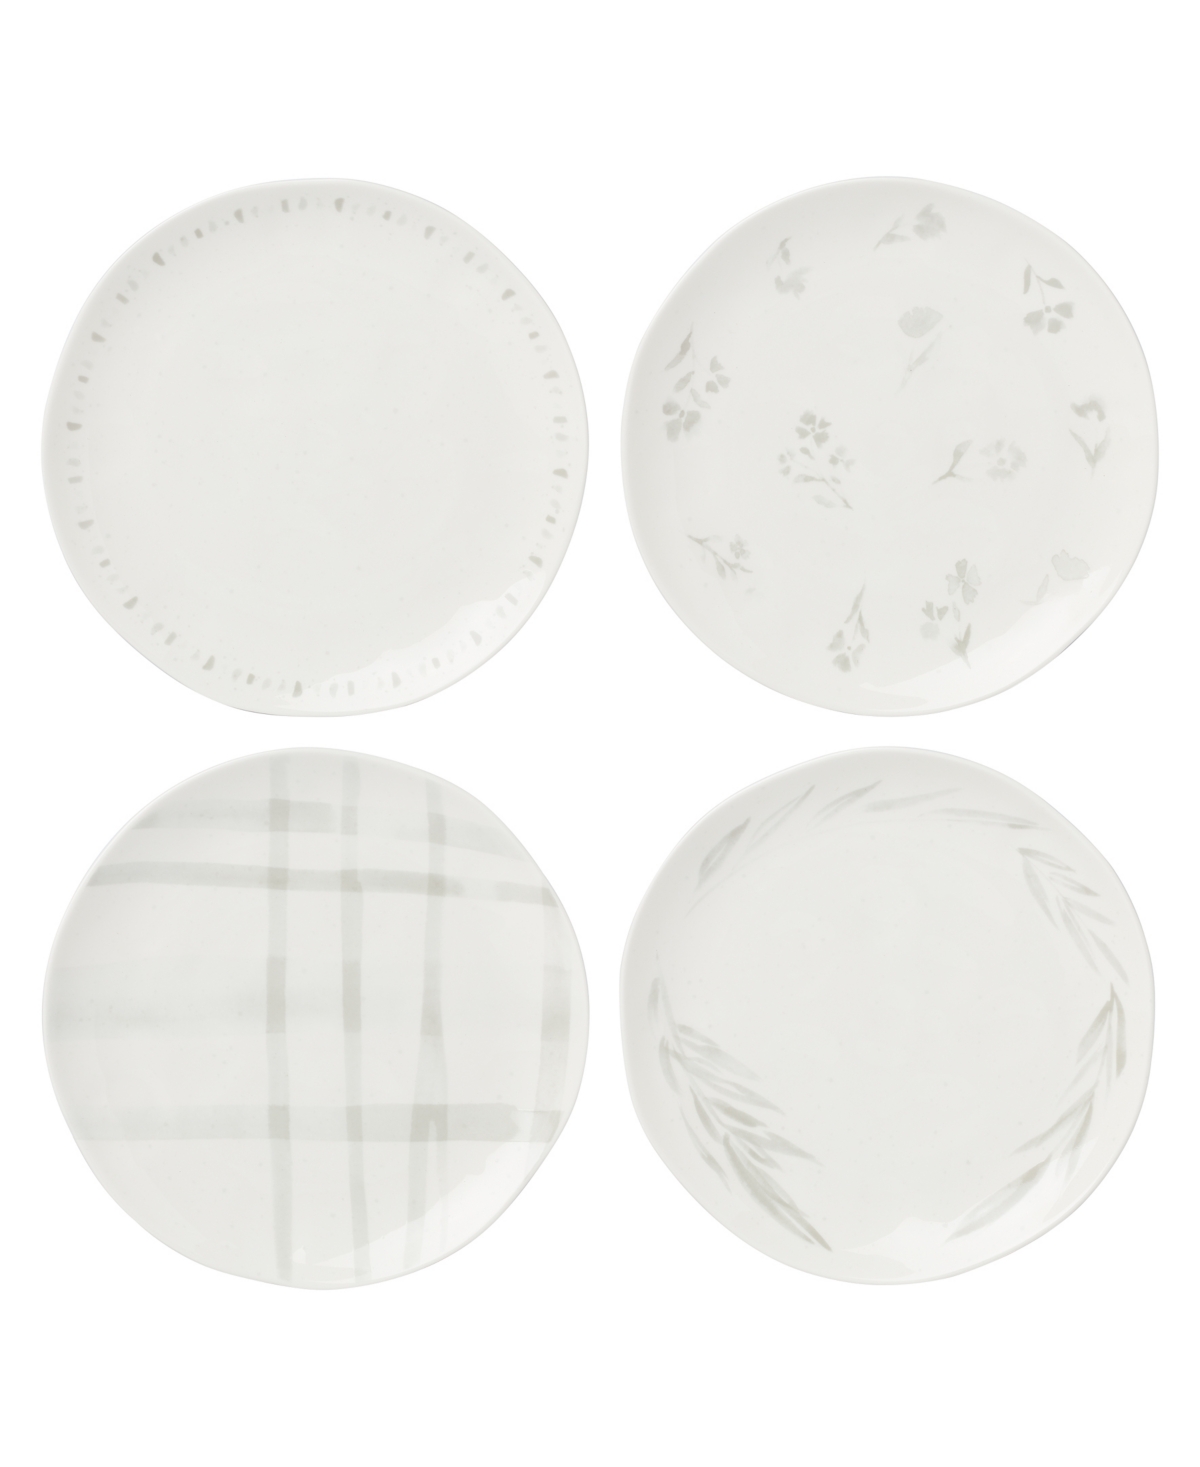 Oyster Bay Accent Plate Set, Set of 4 - White